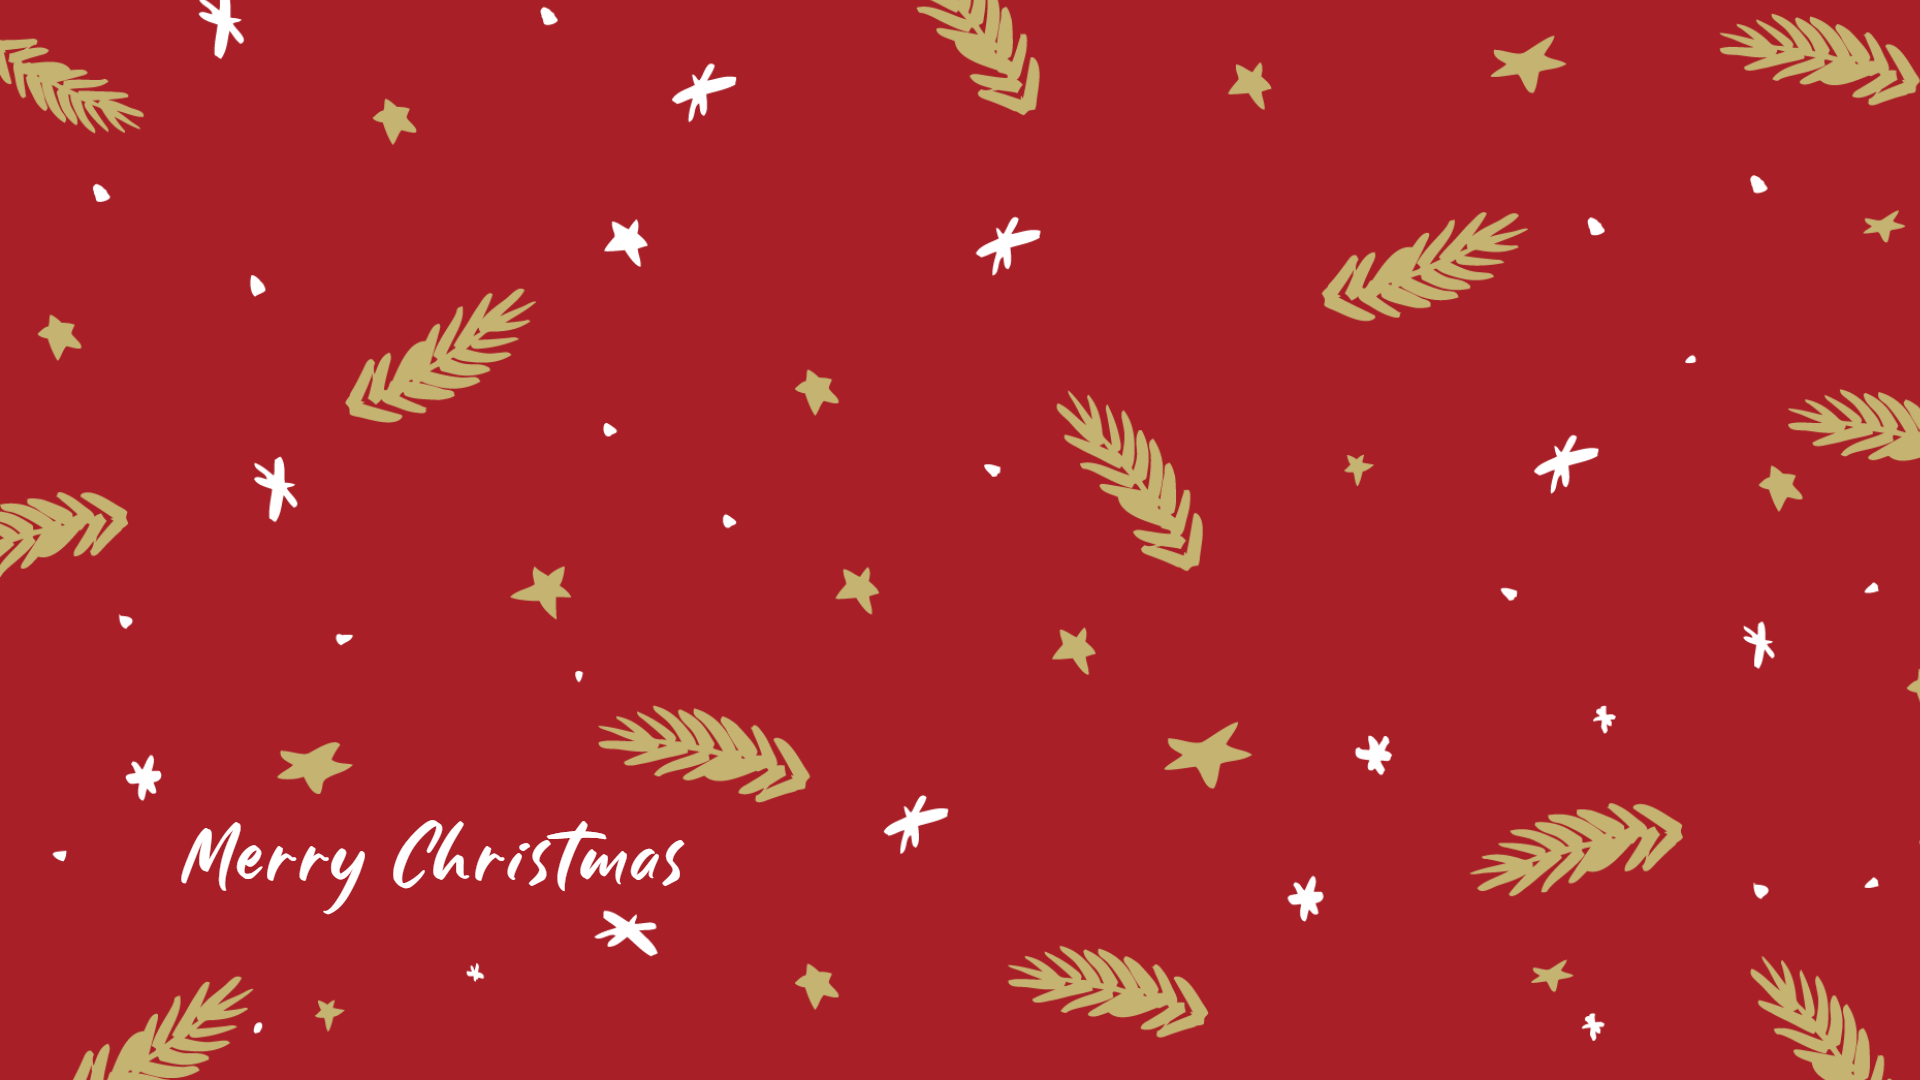 20+ Christmas Wallpapers & Backgrounds for Your Holiday Celebration | Fotor